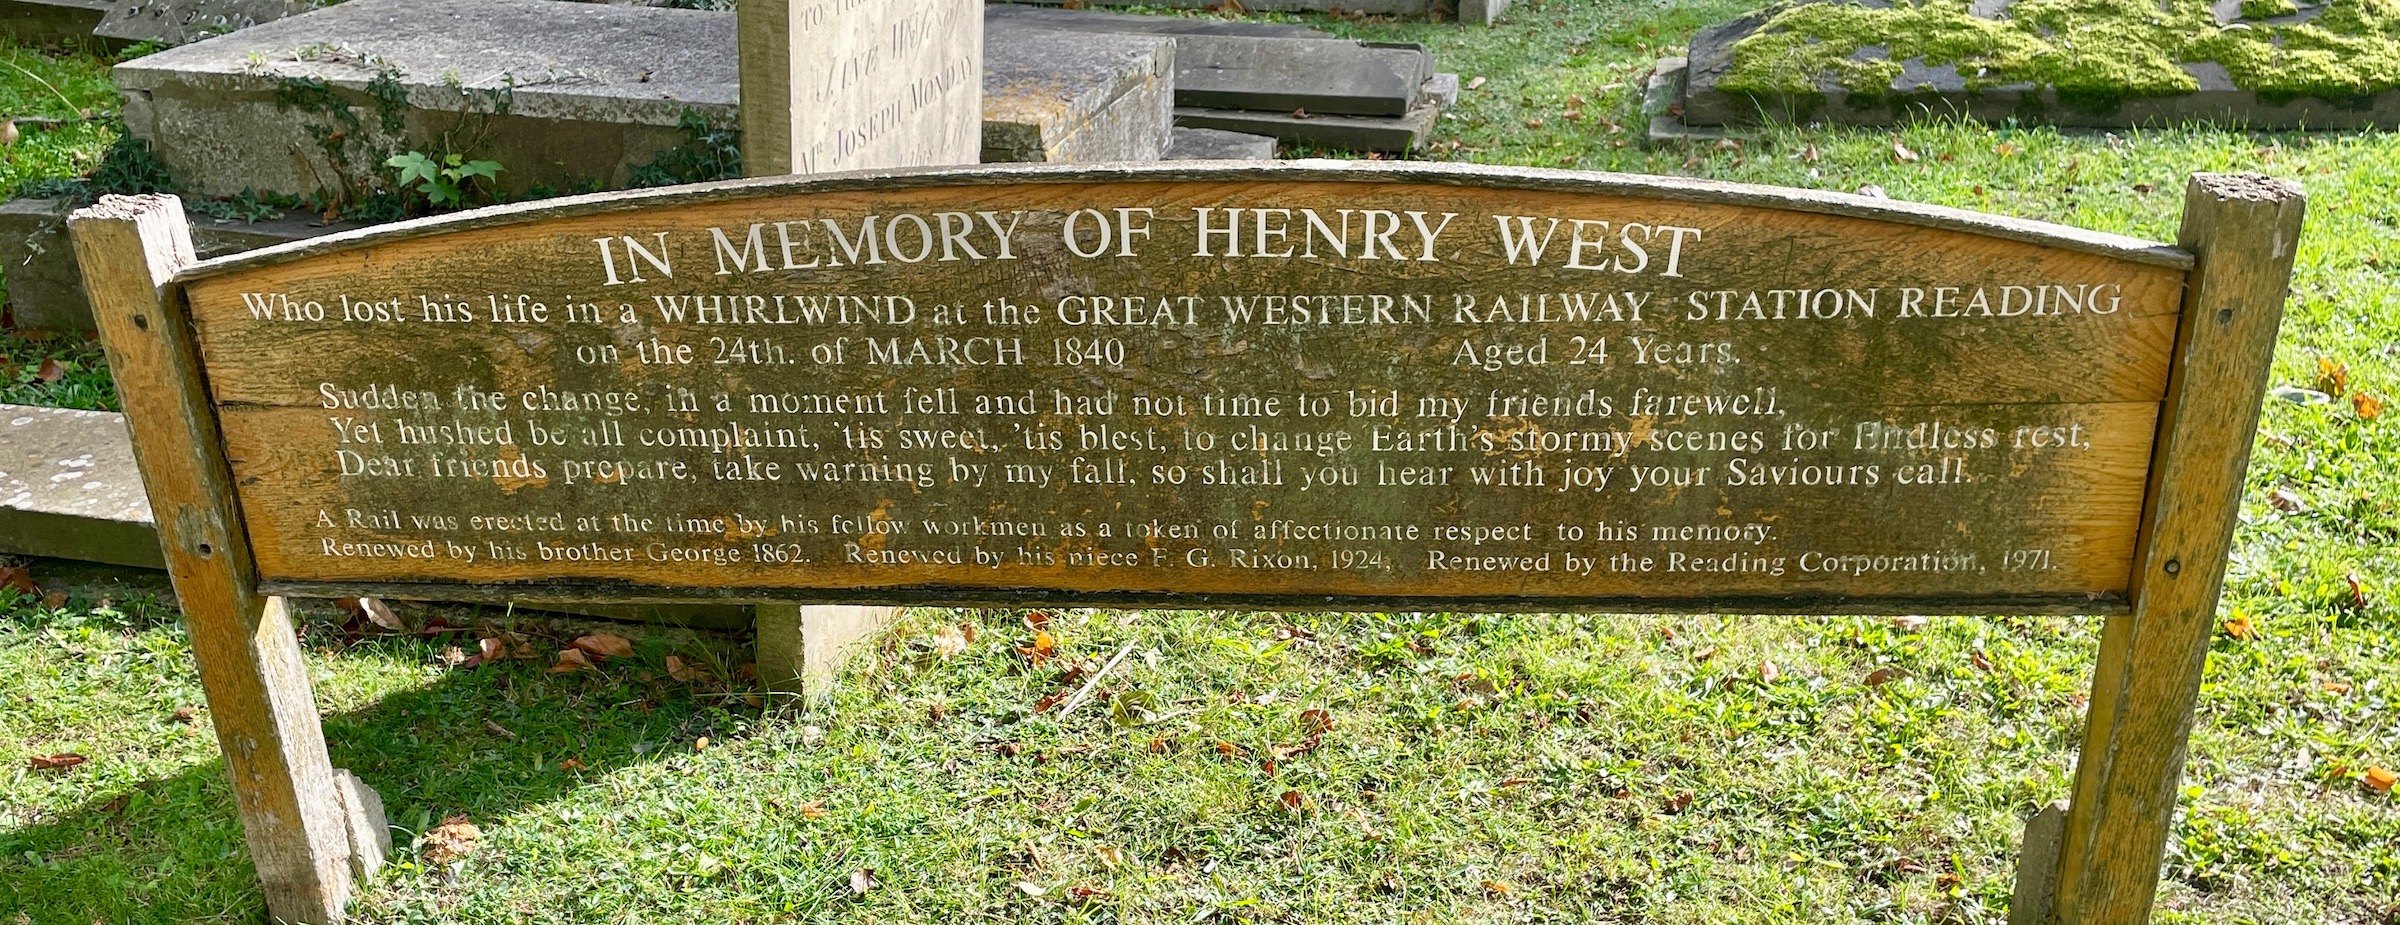 In Memory of Henry West, Reading